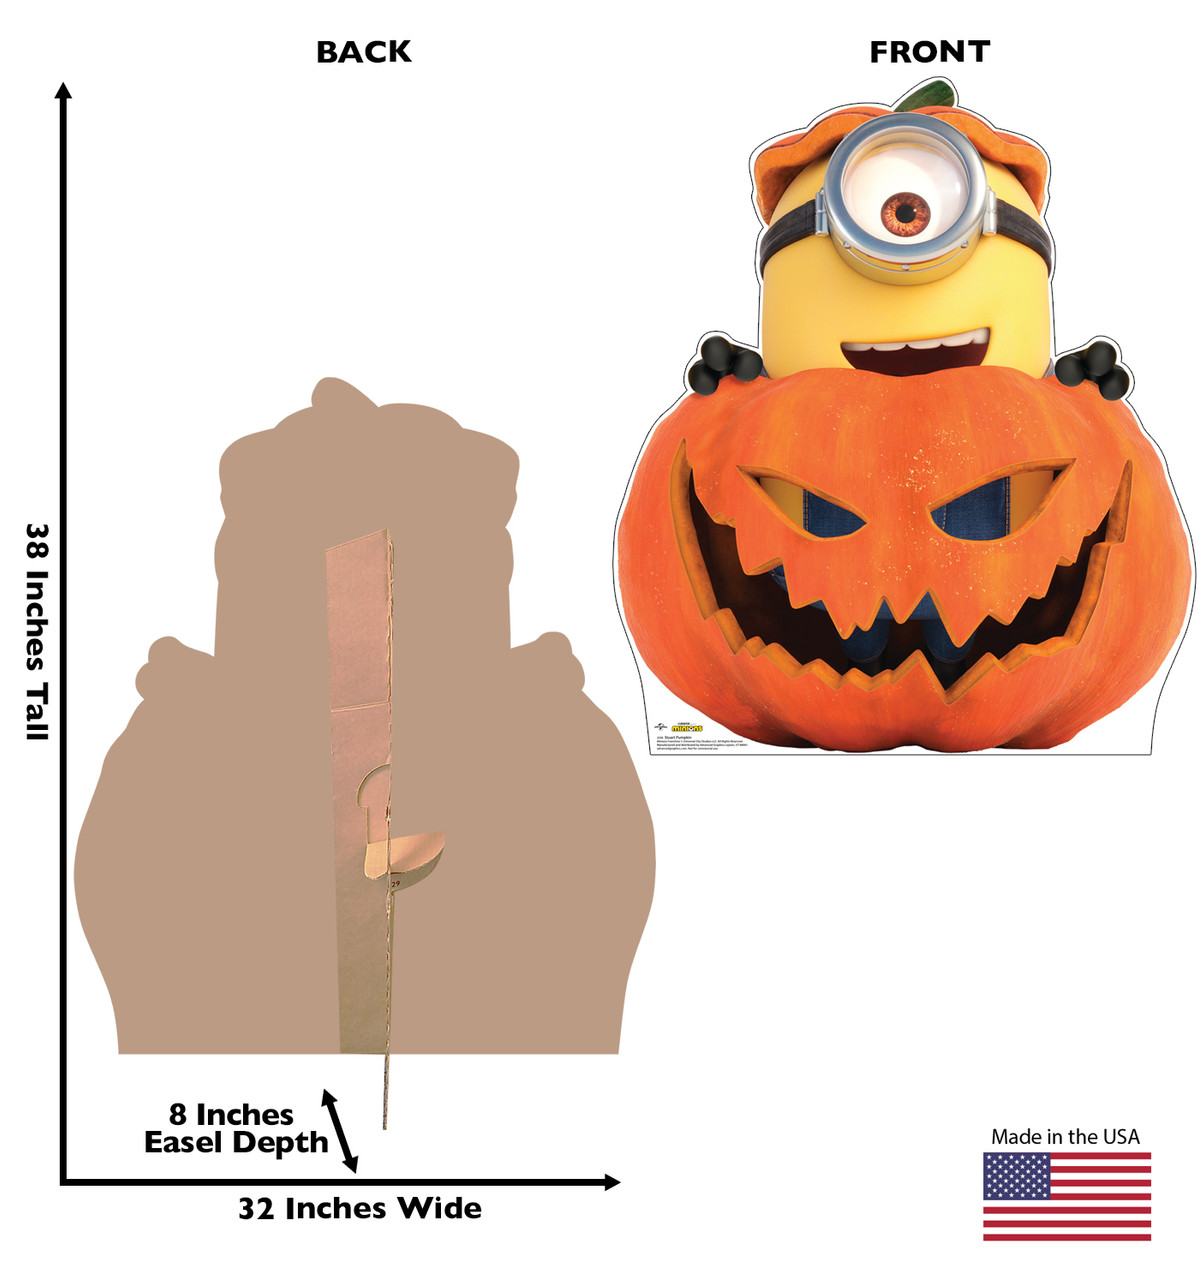 Life-size cardboard standee of Stuart in a Pumpkin from the Minions holiday collection with back and front dimensions.